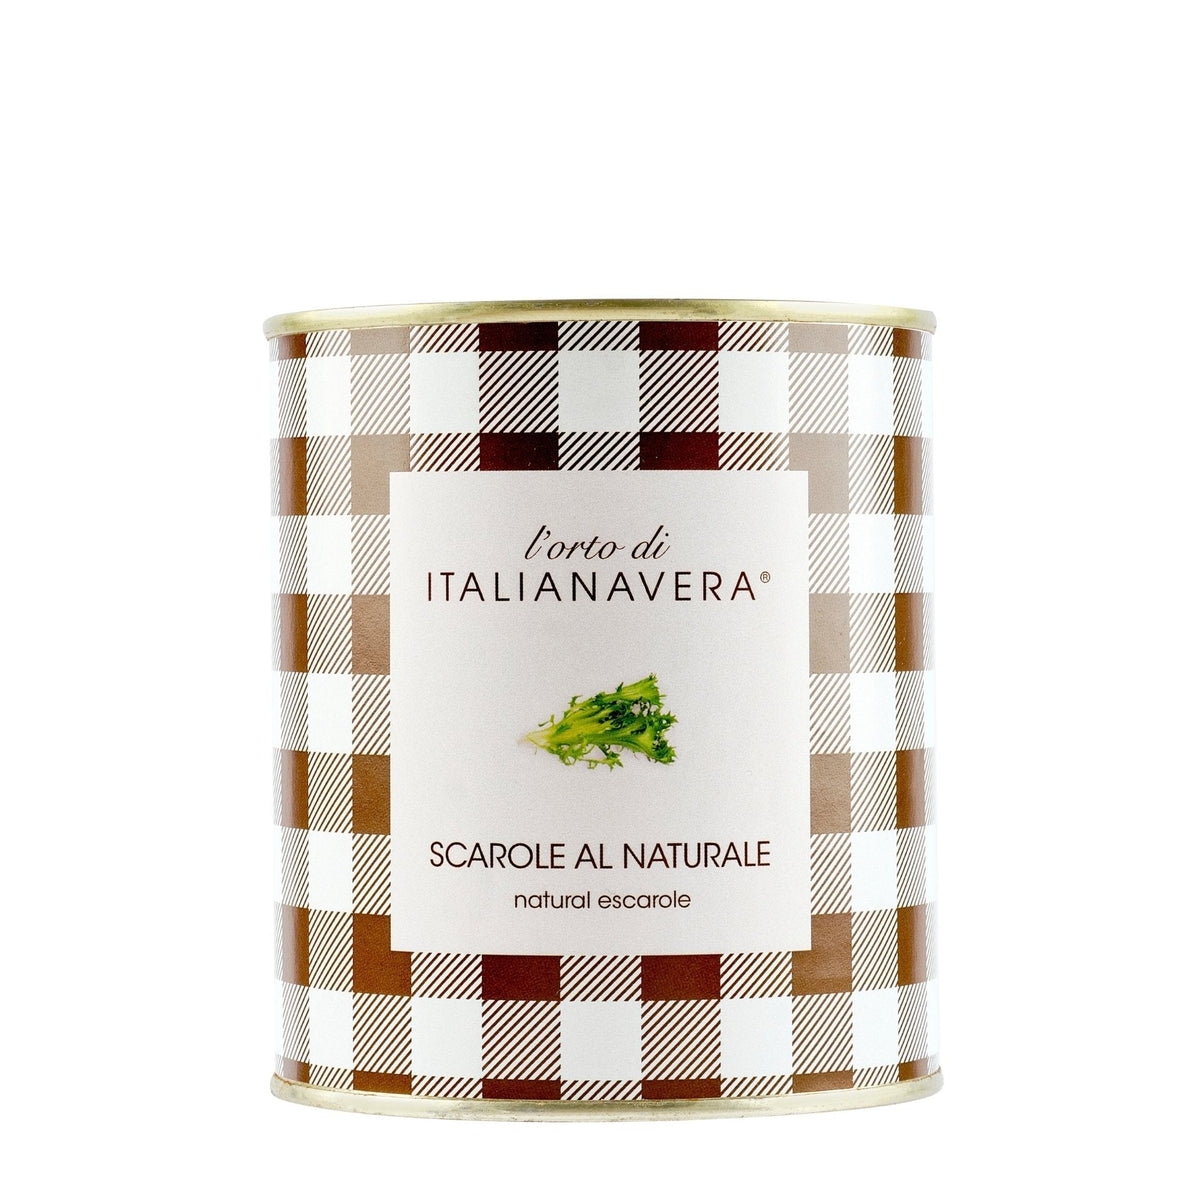 Italianavera Scarole 800g  | Imported and distributed in the UK by Just Gourmet Foods